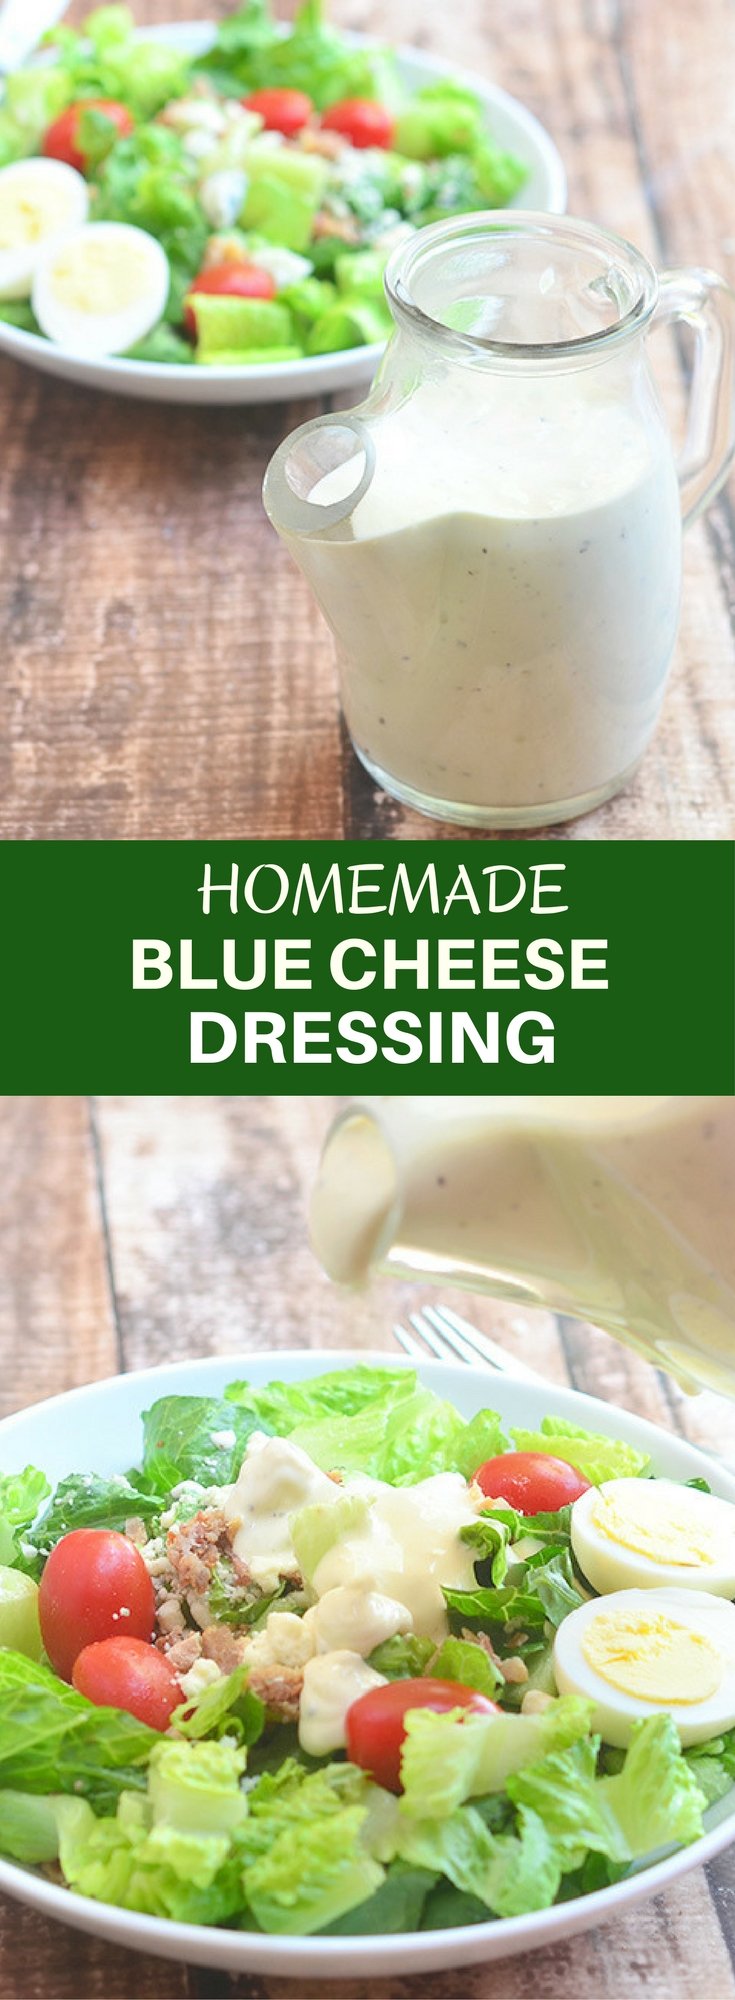 Homemade Blue Cheese Dressing is the best thing you'll ever put on your salad! It's easy to make and fresher, cheaper and better than store-bought!